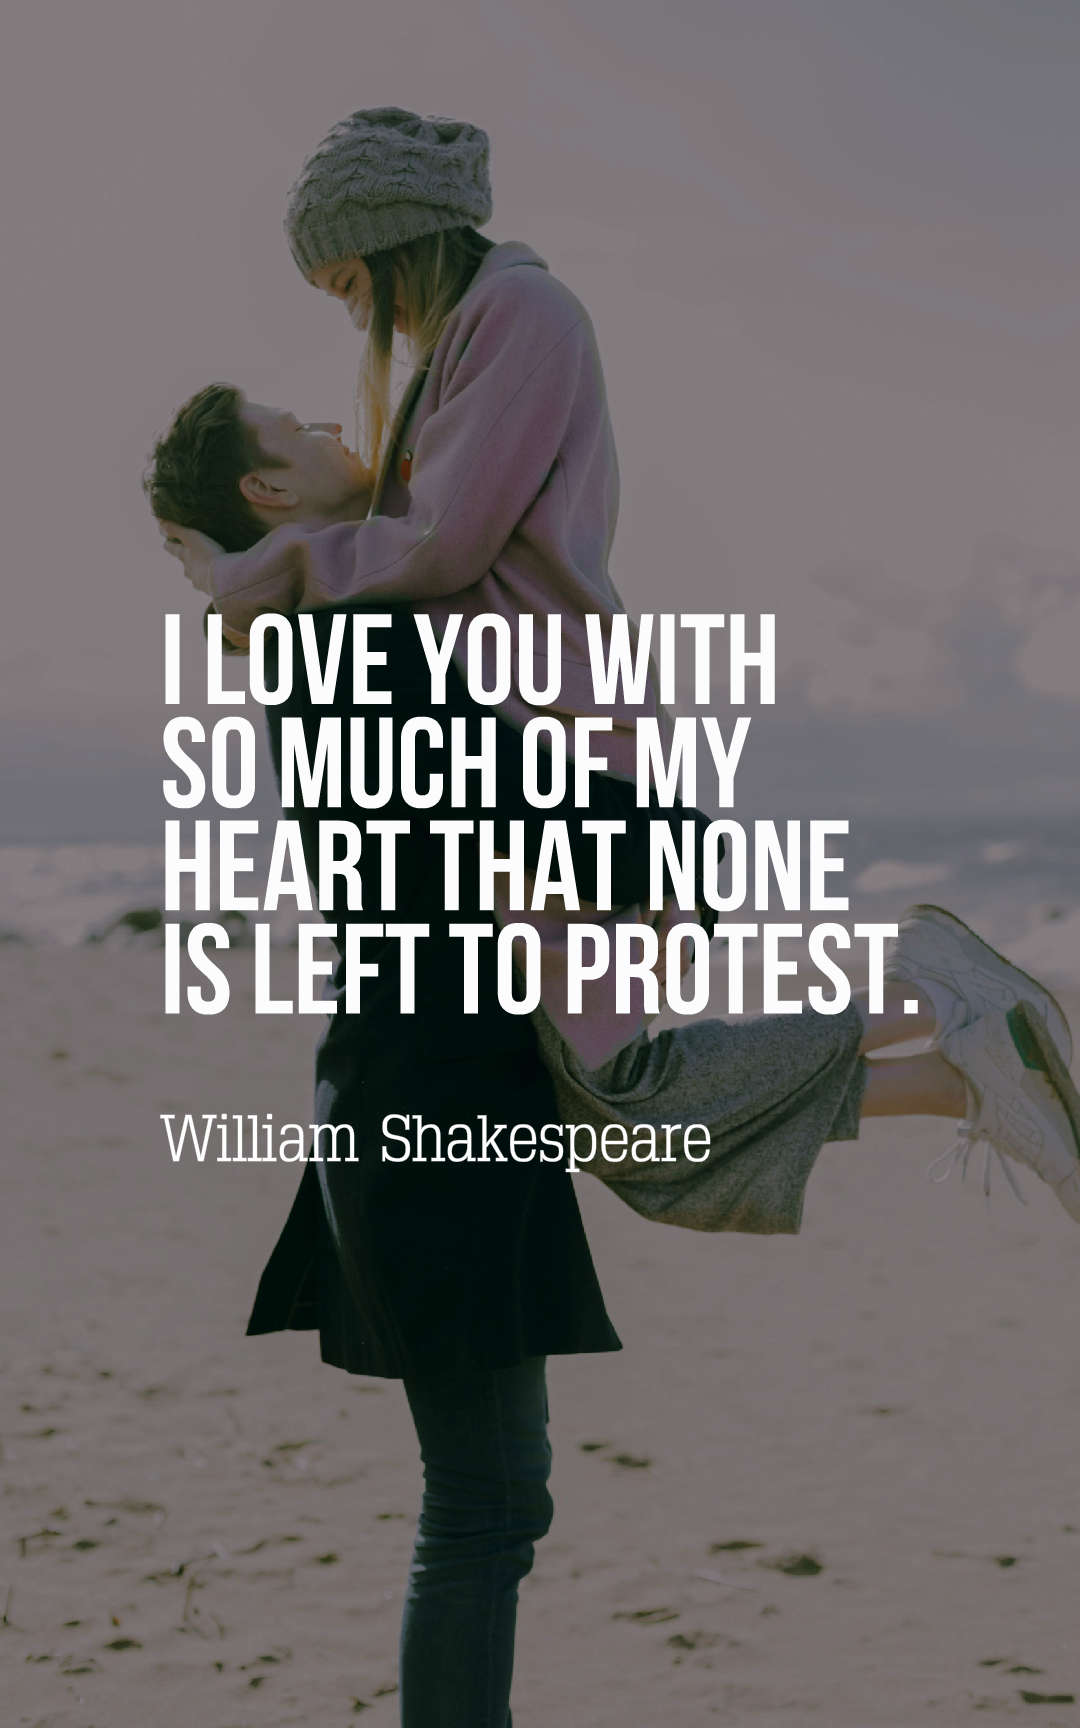 I love you with so much of my heart that none is left to protest.